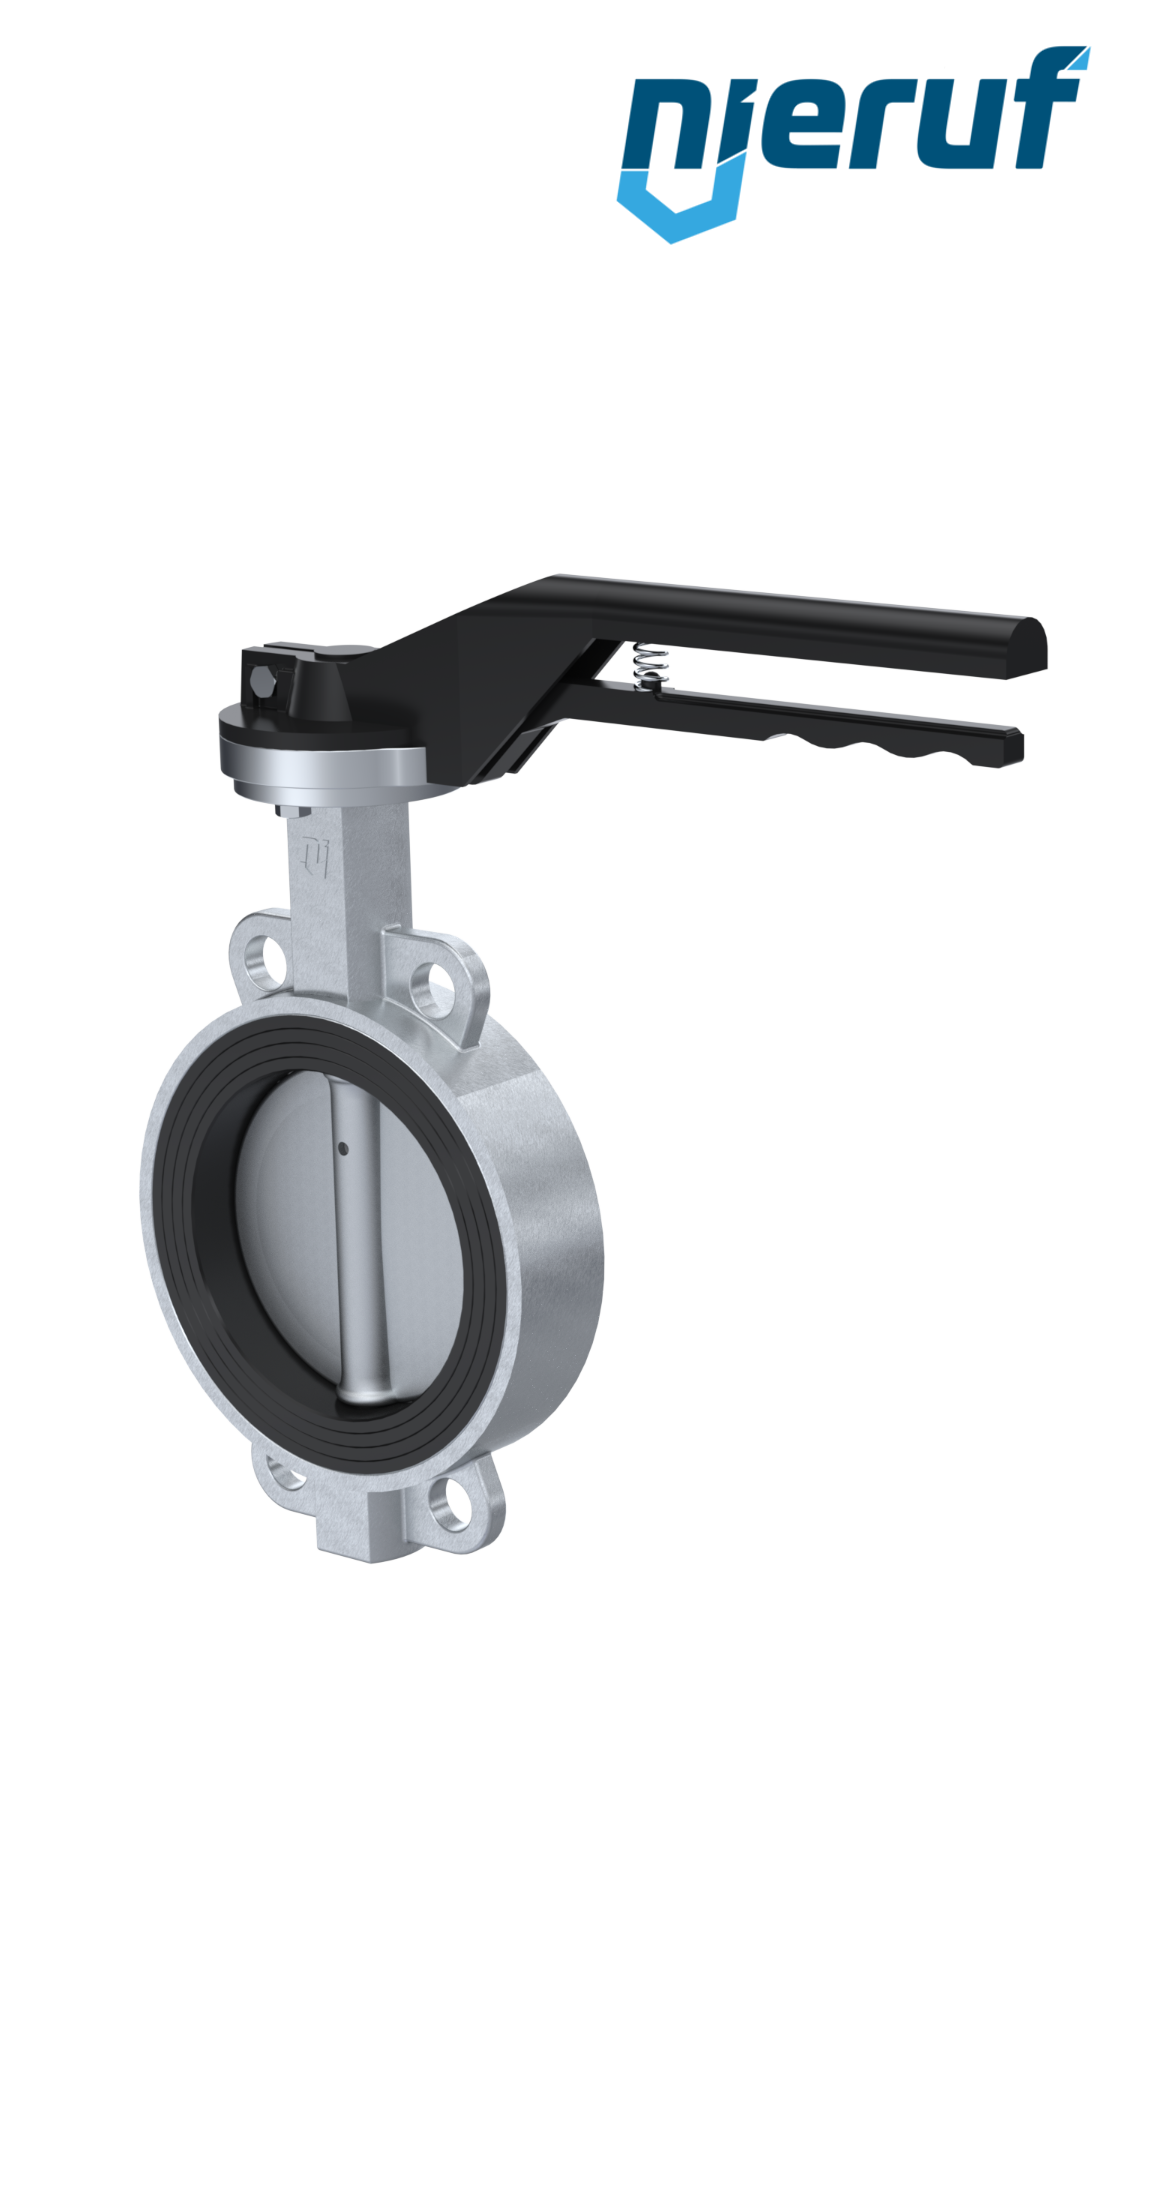 Butterfly-valve-stainless-steel DN 100 PN16 AK08 EPDM notch lever